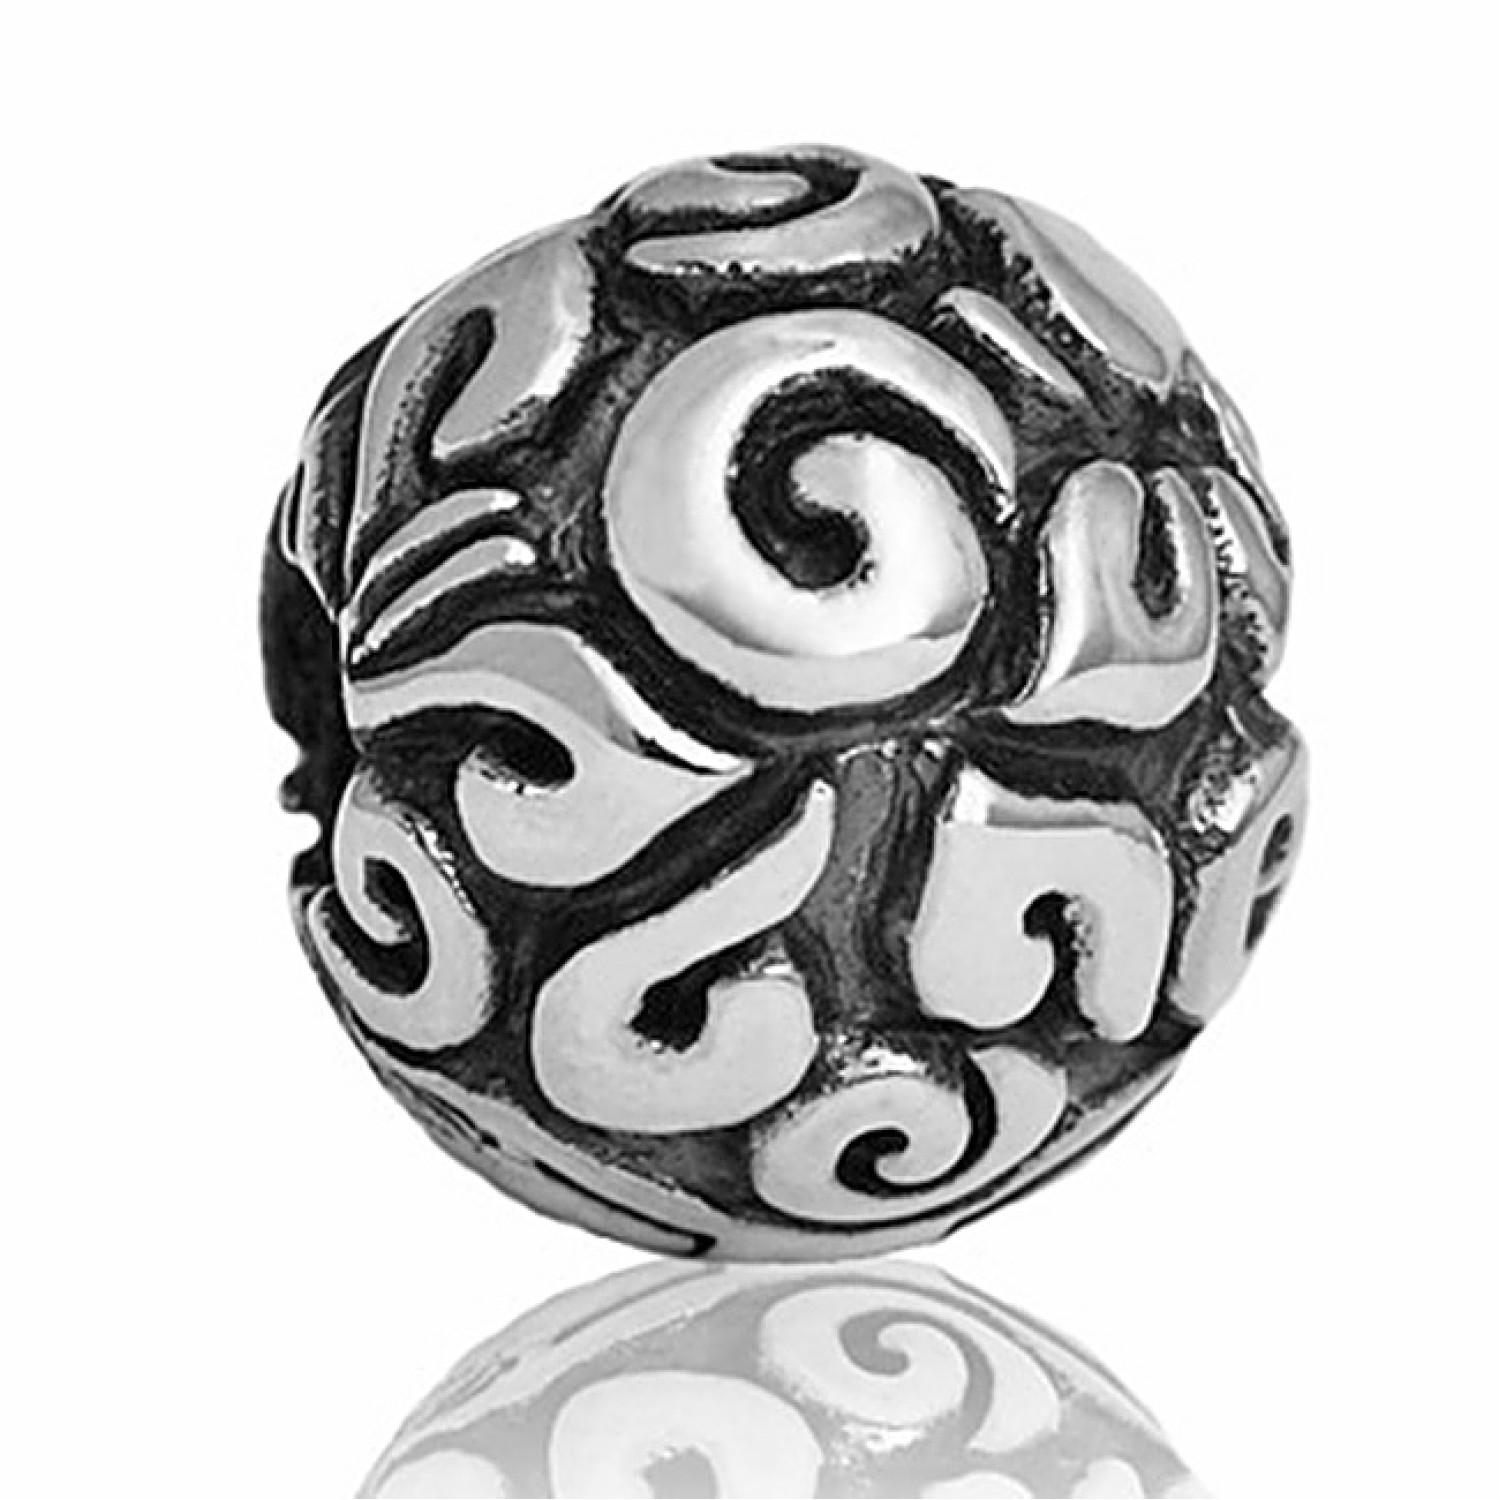 LKC024 Evolve Charms NZ Spirit End Stopper. This beautiful design represents the power & spirit infused throughout New Zealand’s rich cultural heritage. Curving koru spirals, representing the circle of life, new beginnings & growth combine with po